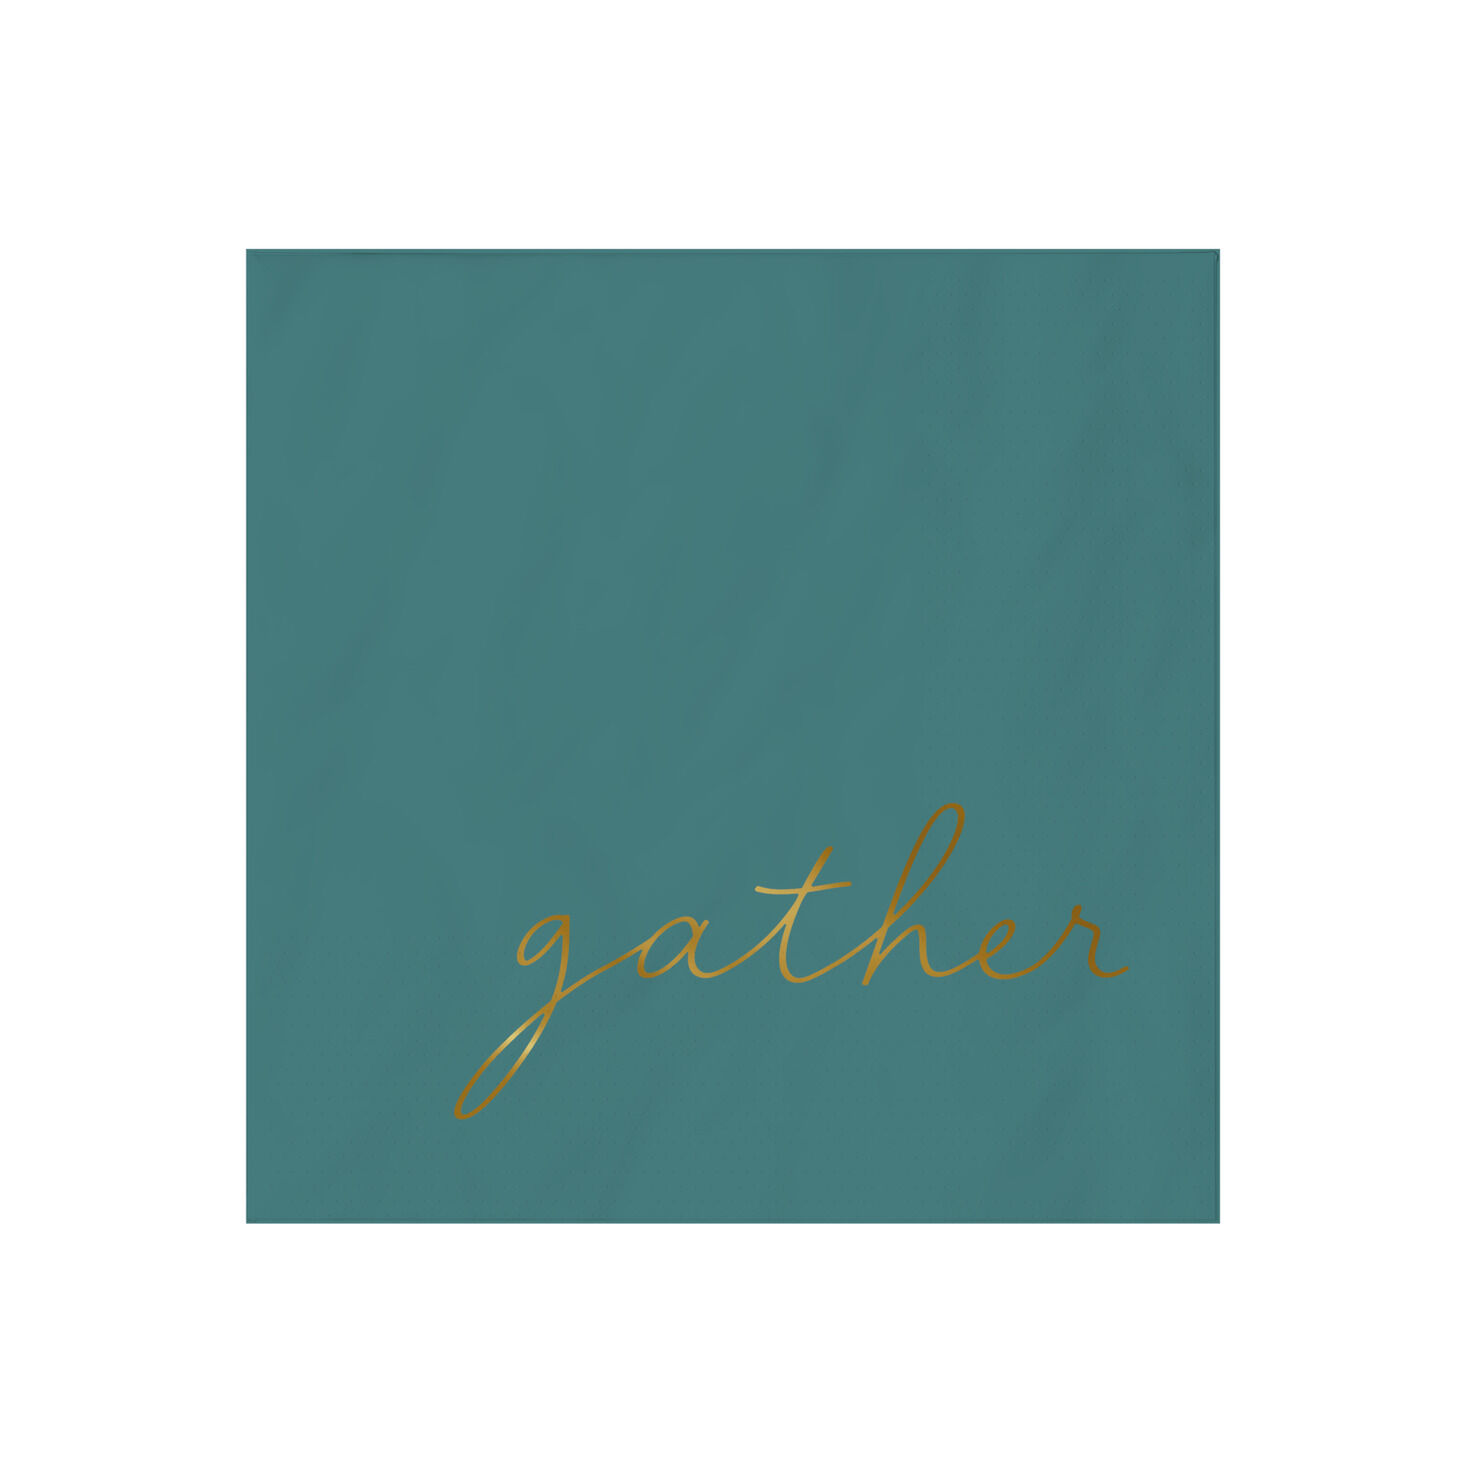 Jade Green "Gather" Cocktail Napkins, Set of 16 for only USD 4.49 | Hallmark